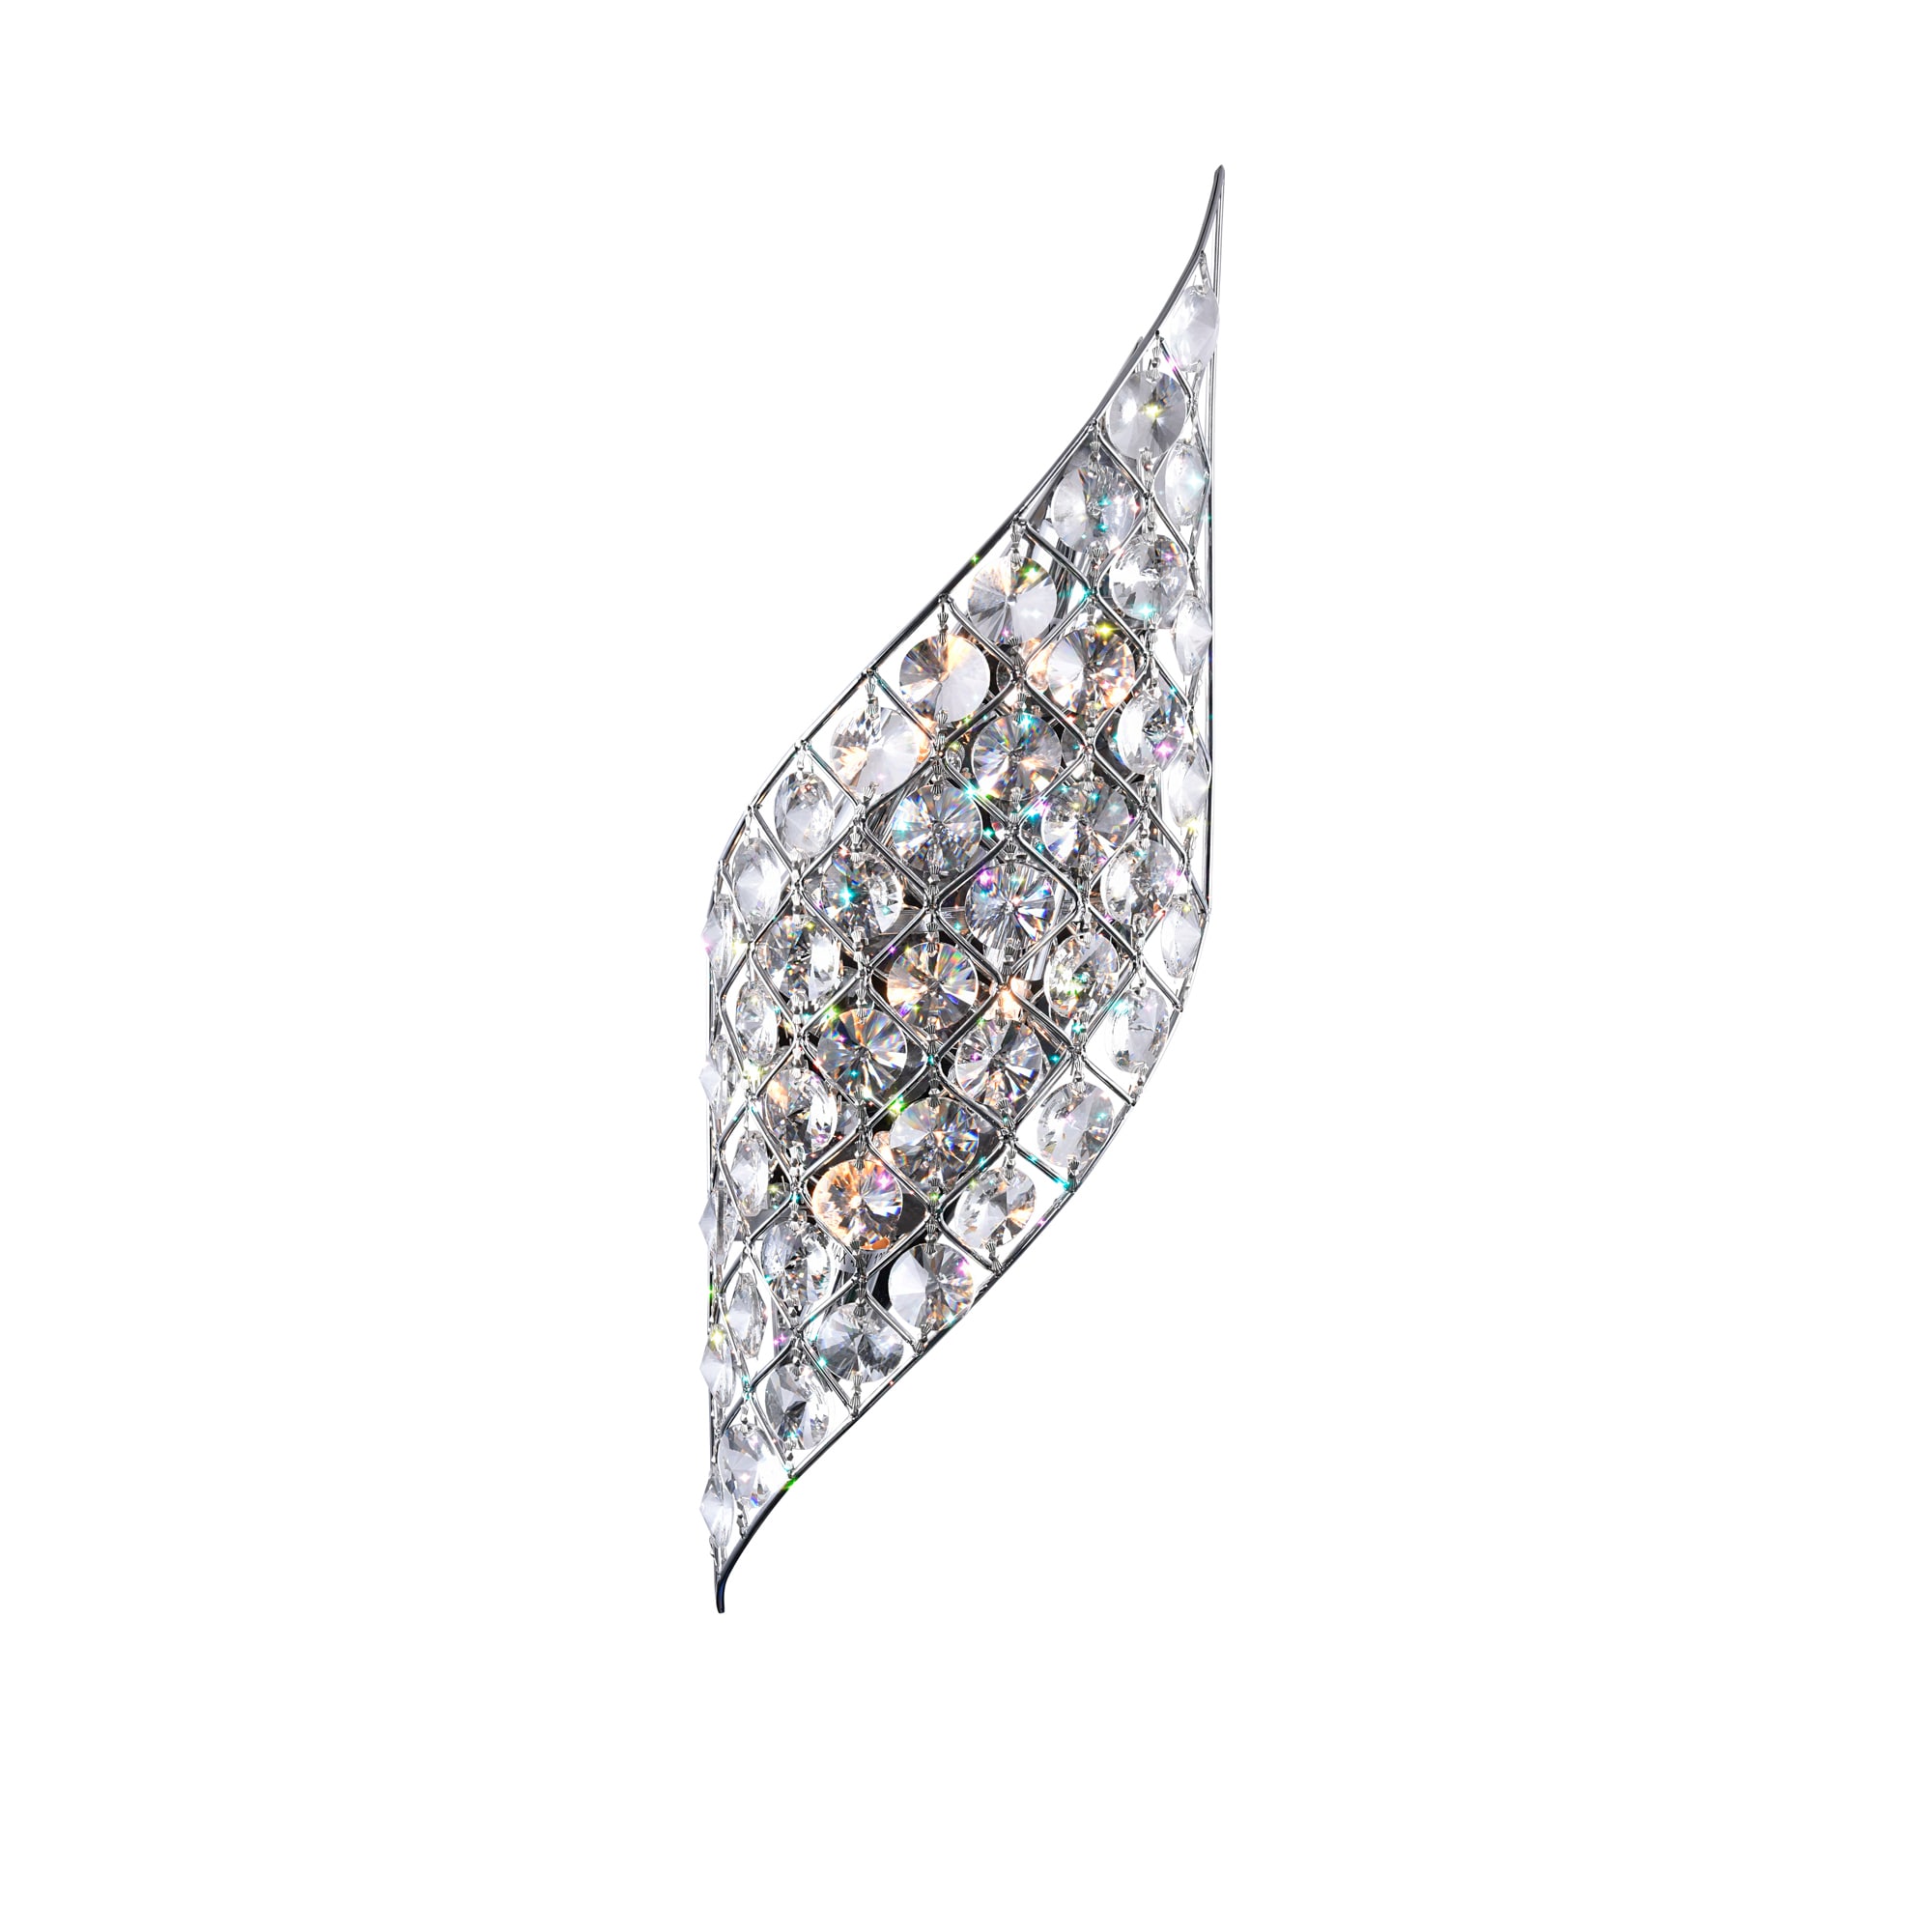 CWI Lighting Chique 7-in W 4-Light Chrome LED Wall Sconce at Lowes.com